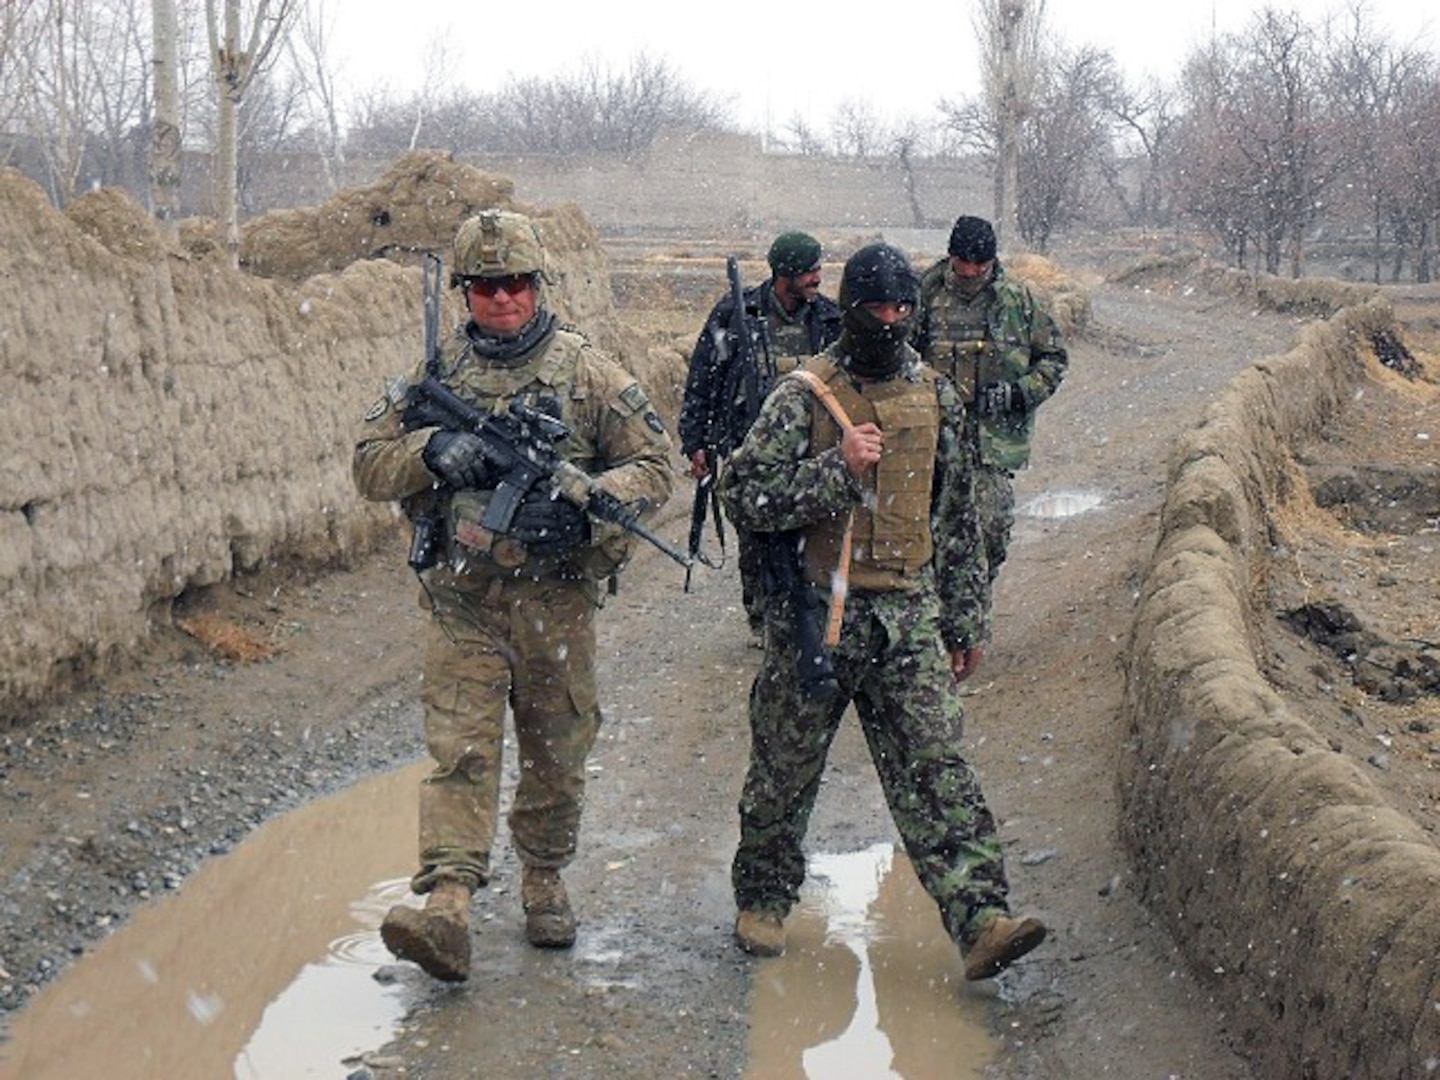 Army Staff Sgt. Clint Koerperich, an Iowa Guardmember and squad leader for 2nd Platoon, Company C., 1st Battalion, 168th Infantry Regiment, patrols with Afghan National Army soldiers to investigate possible insurgent cache locations in the Zormat District on Feb. 5, 2011. The ANA and 2nd Platoon responded to a tip provided to the ANA by the Guardians of Peace program, which is designed to allow villagers to give information anonymously to Afghan National Security Forces and coalition forces.